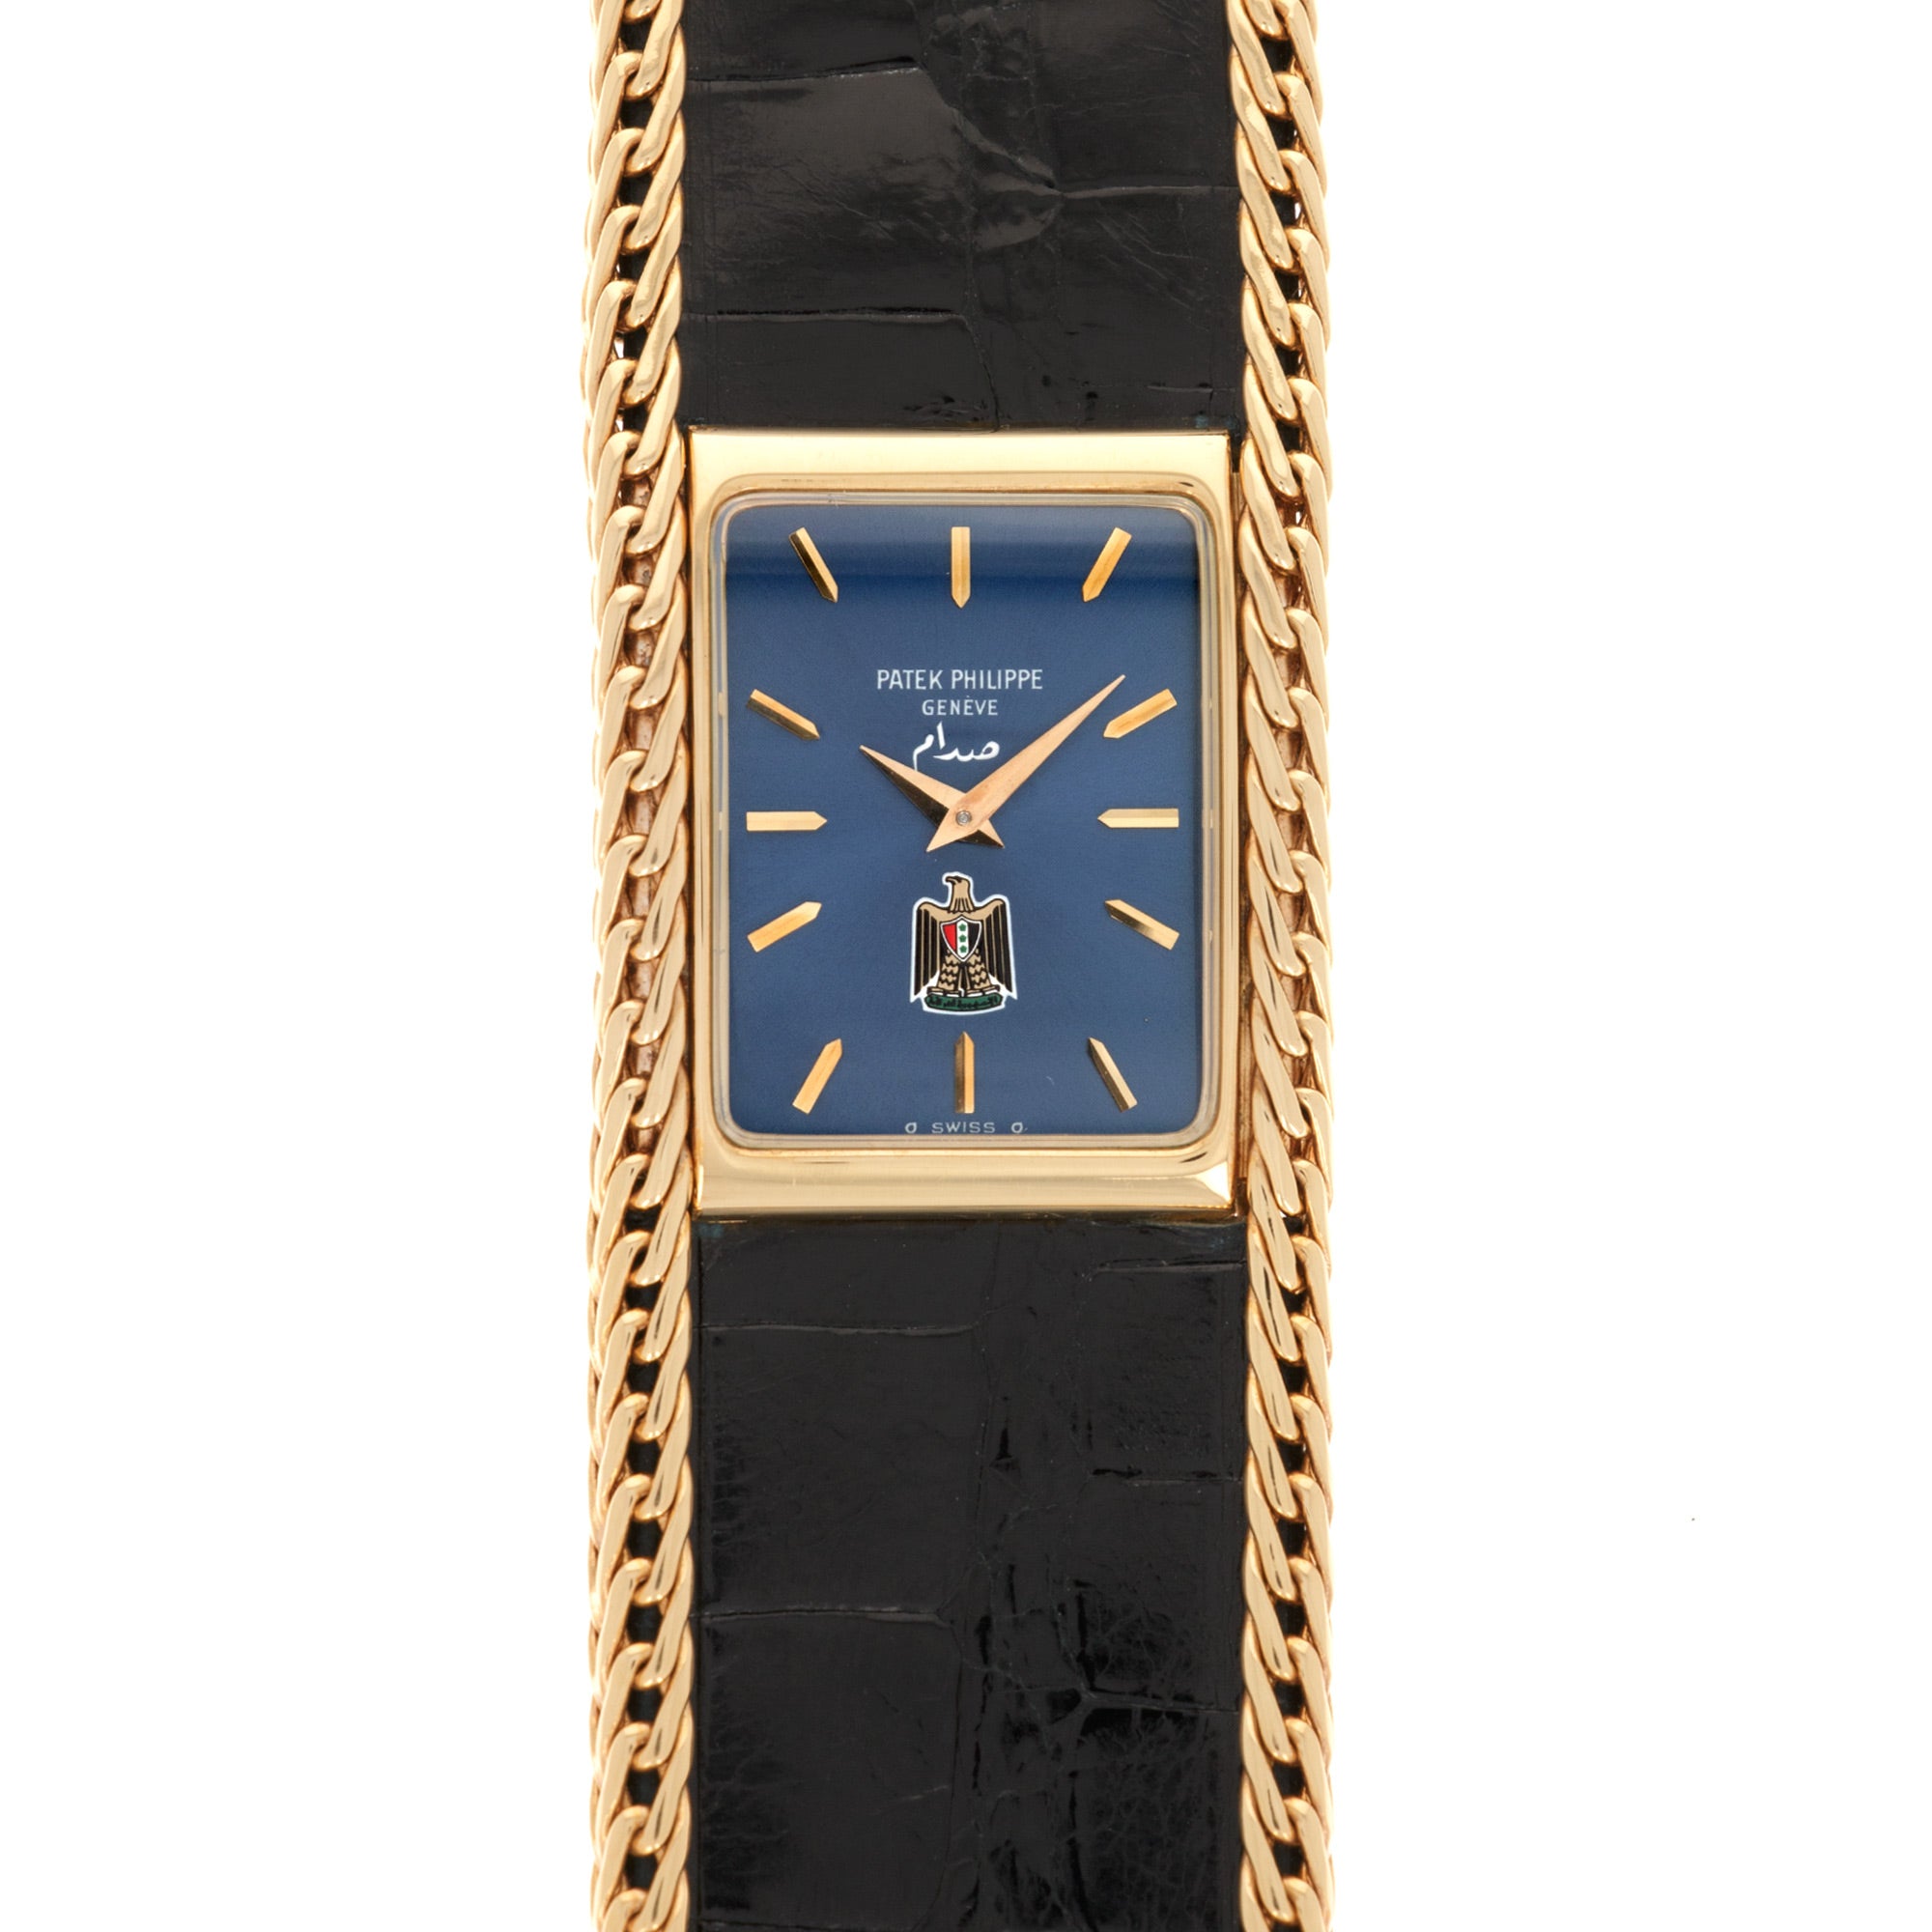 Patek Philippe - Patek Philippe Yellow Gold Bracelet Watch Ref. 4241 with Iraqi Coat of Arms - The Keystone Watches